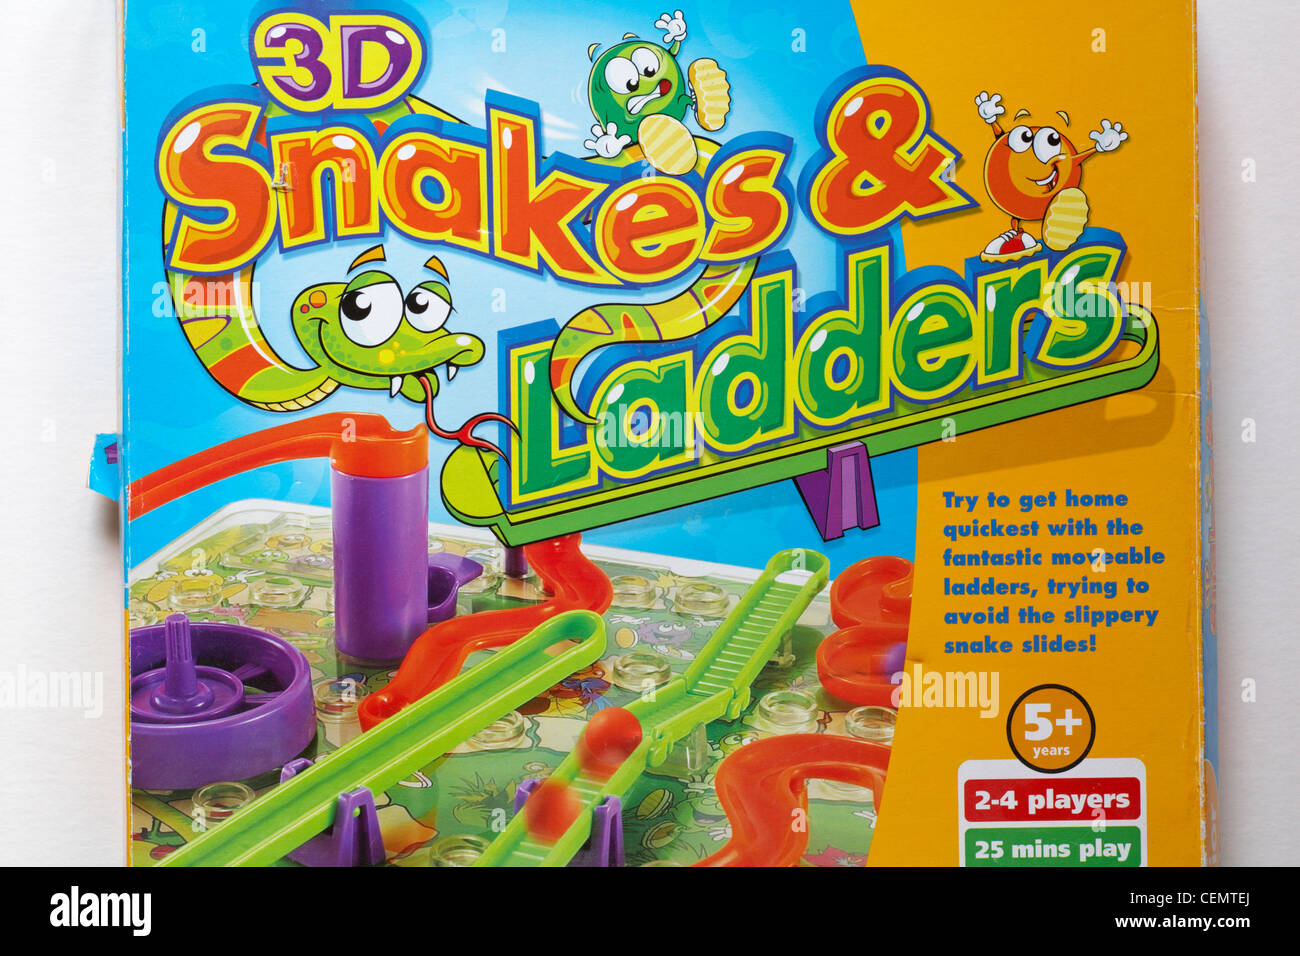 Snakes And Ladders Box